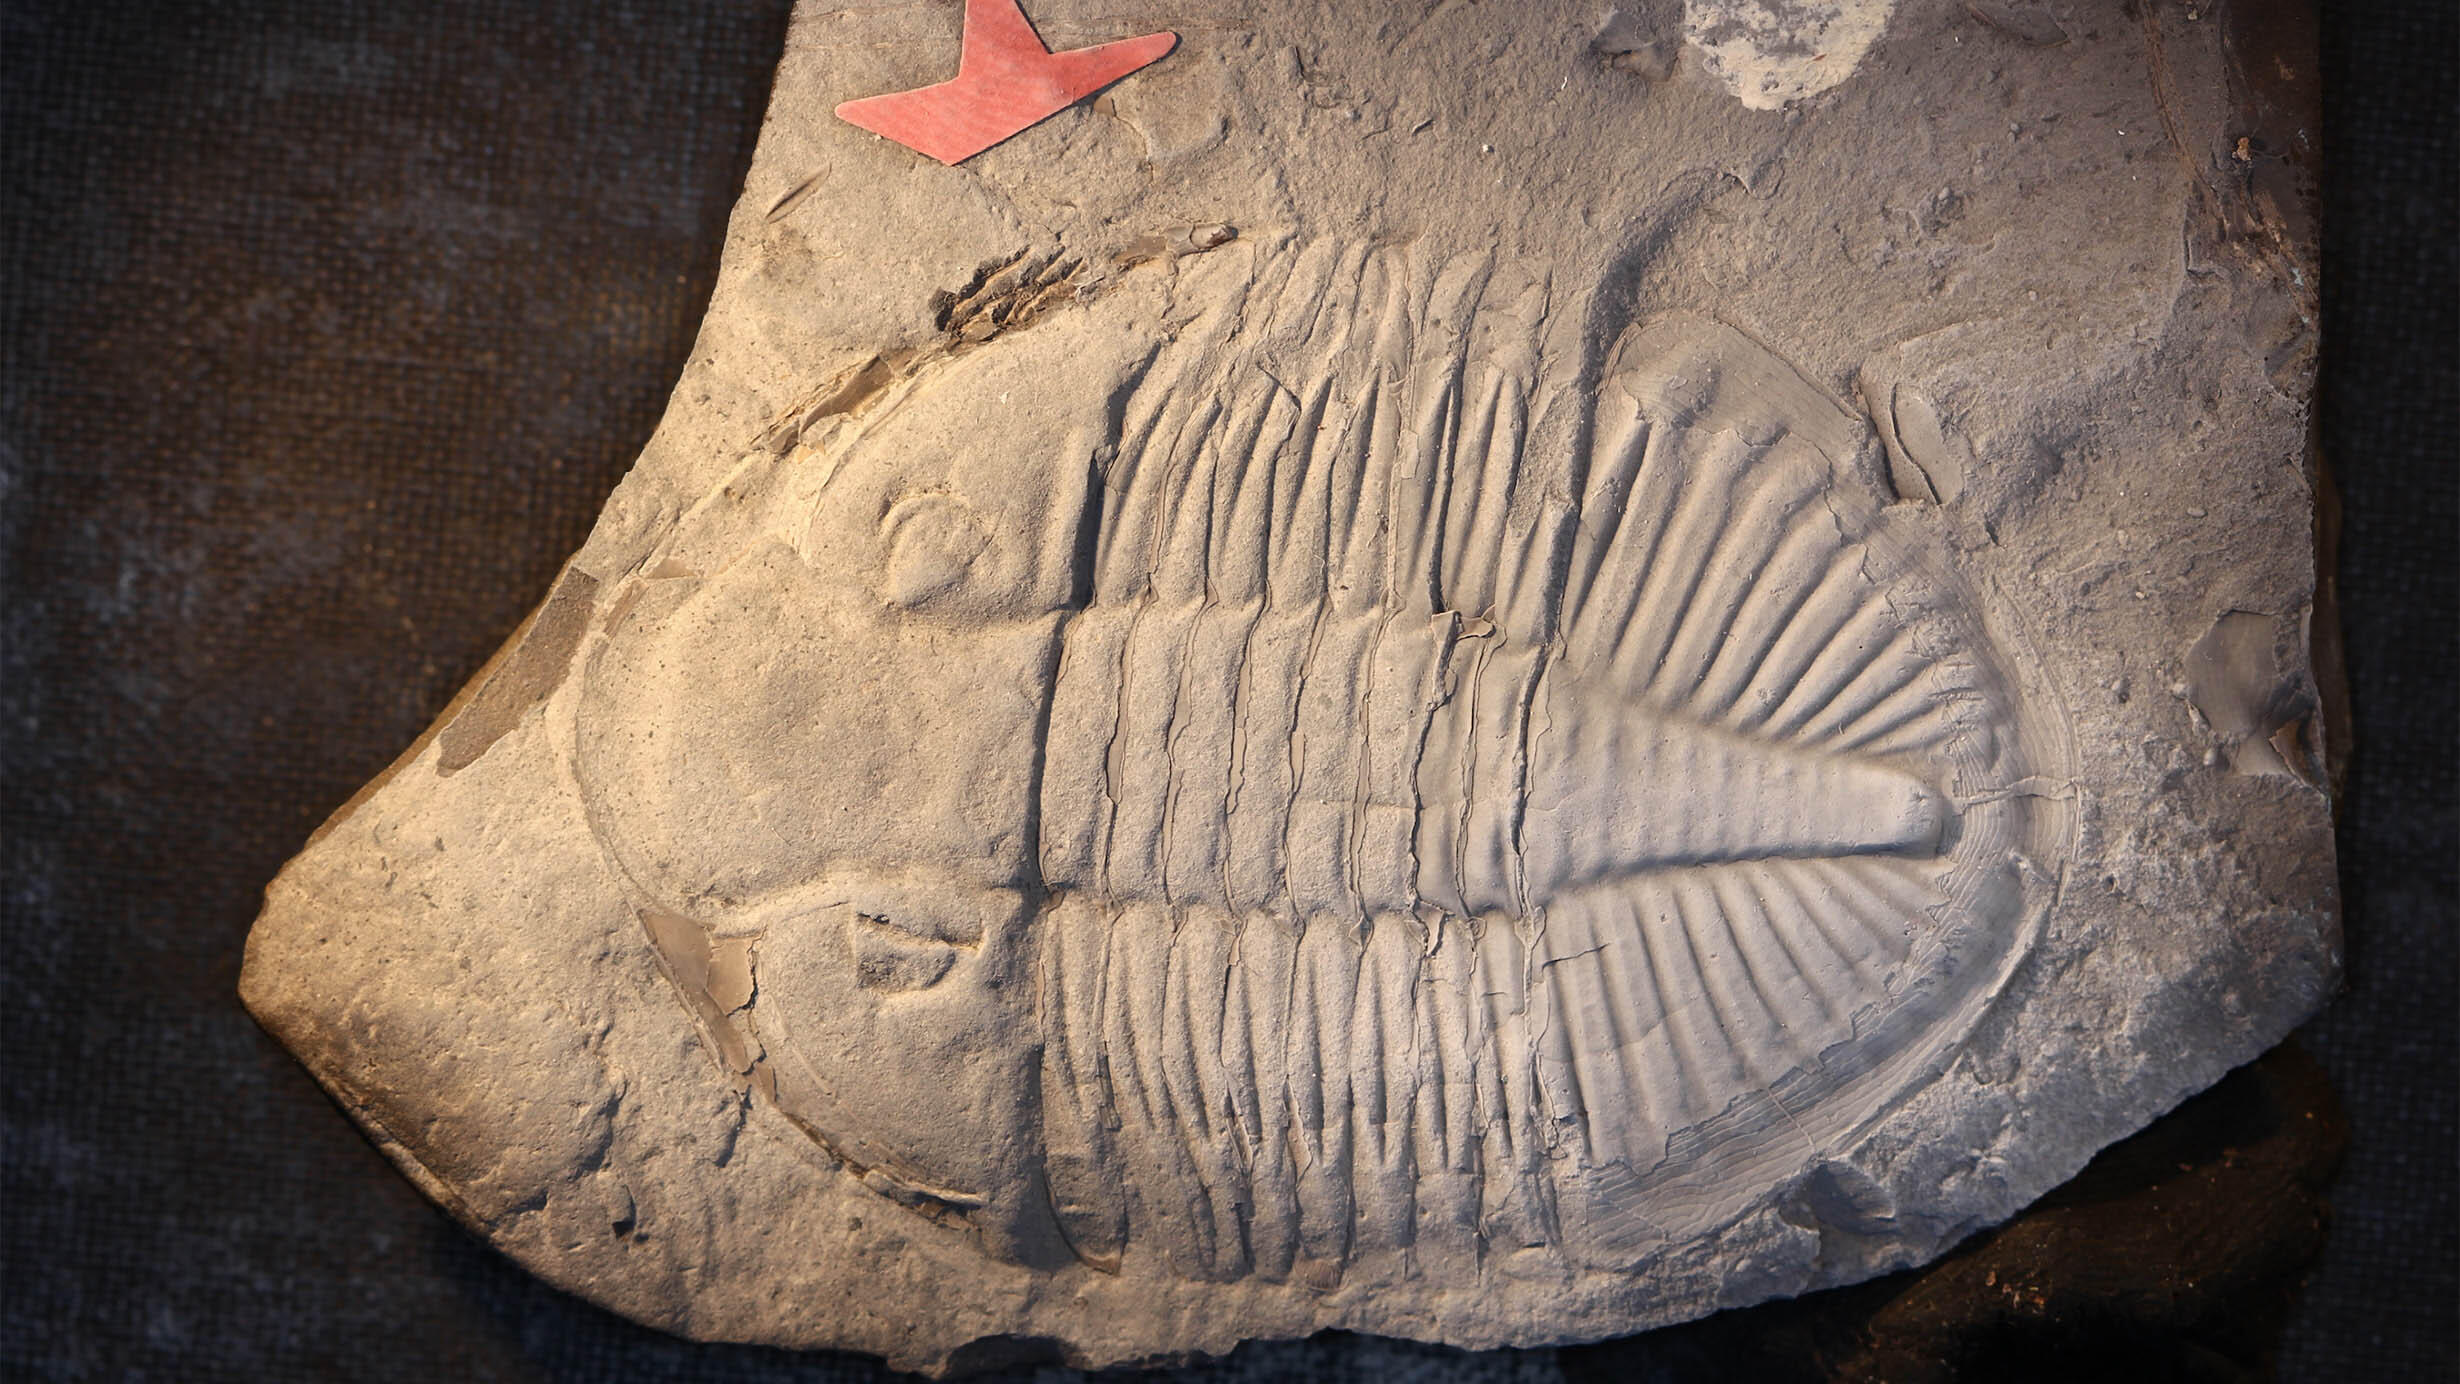 Trilobite fossil specimen with eight segments in thorax and many more segments in tail. 